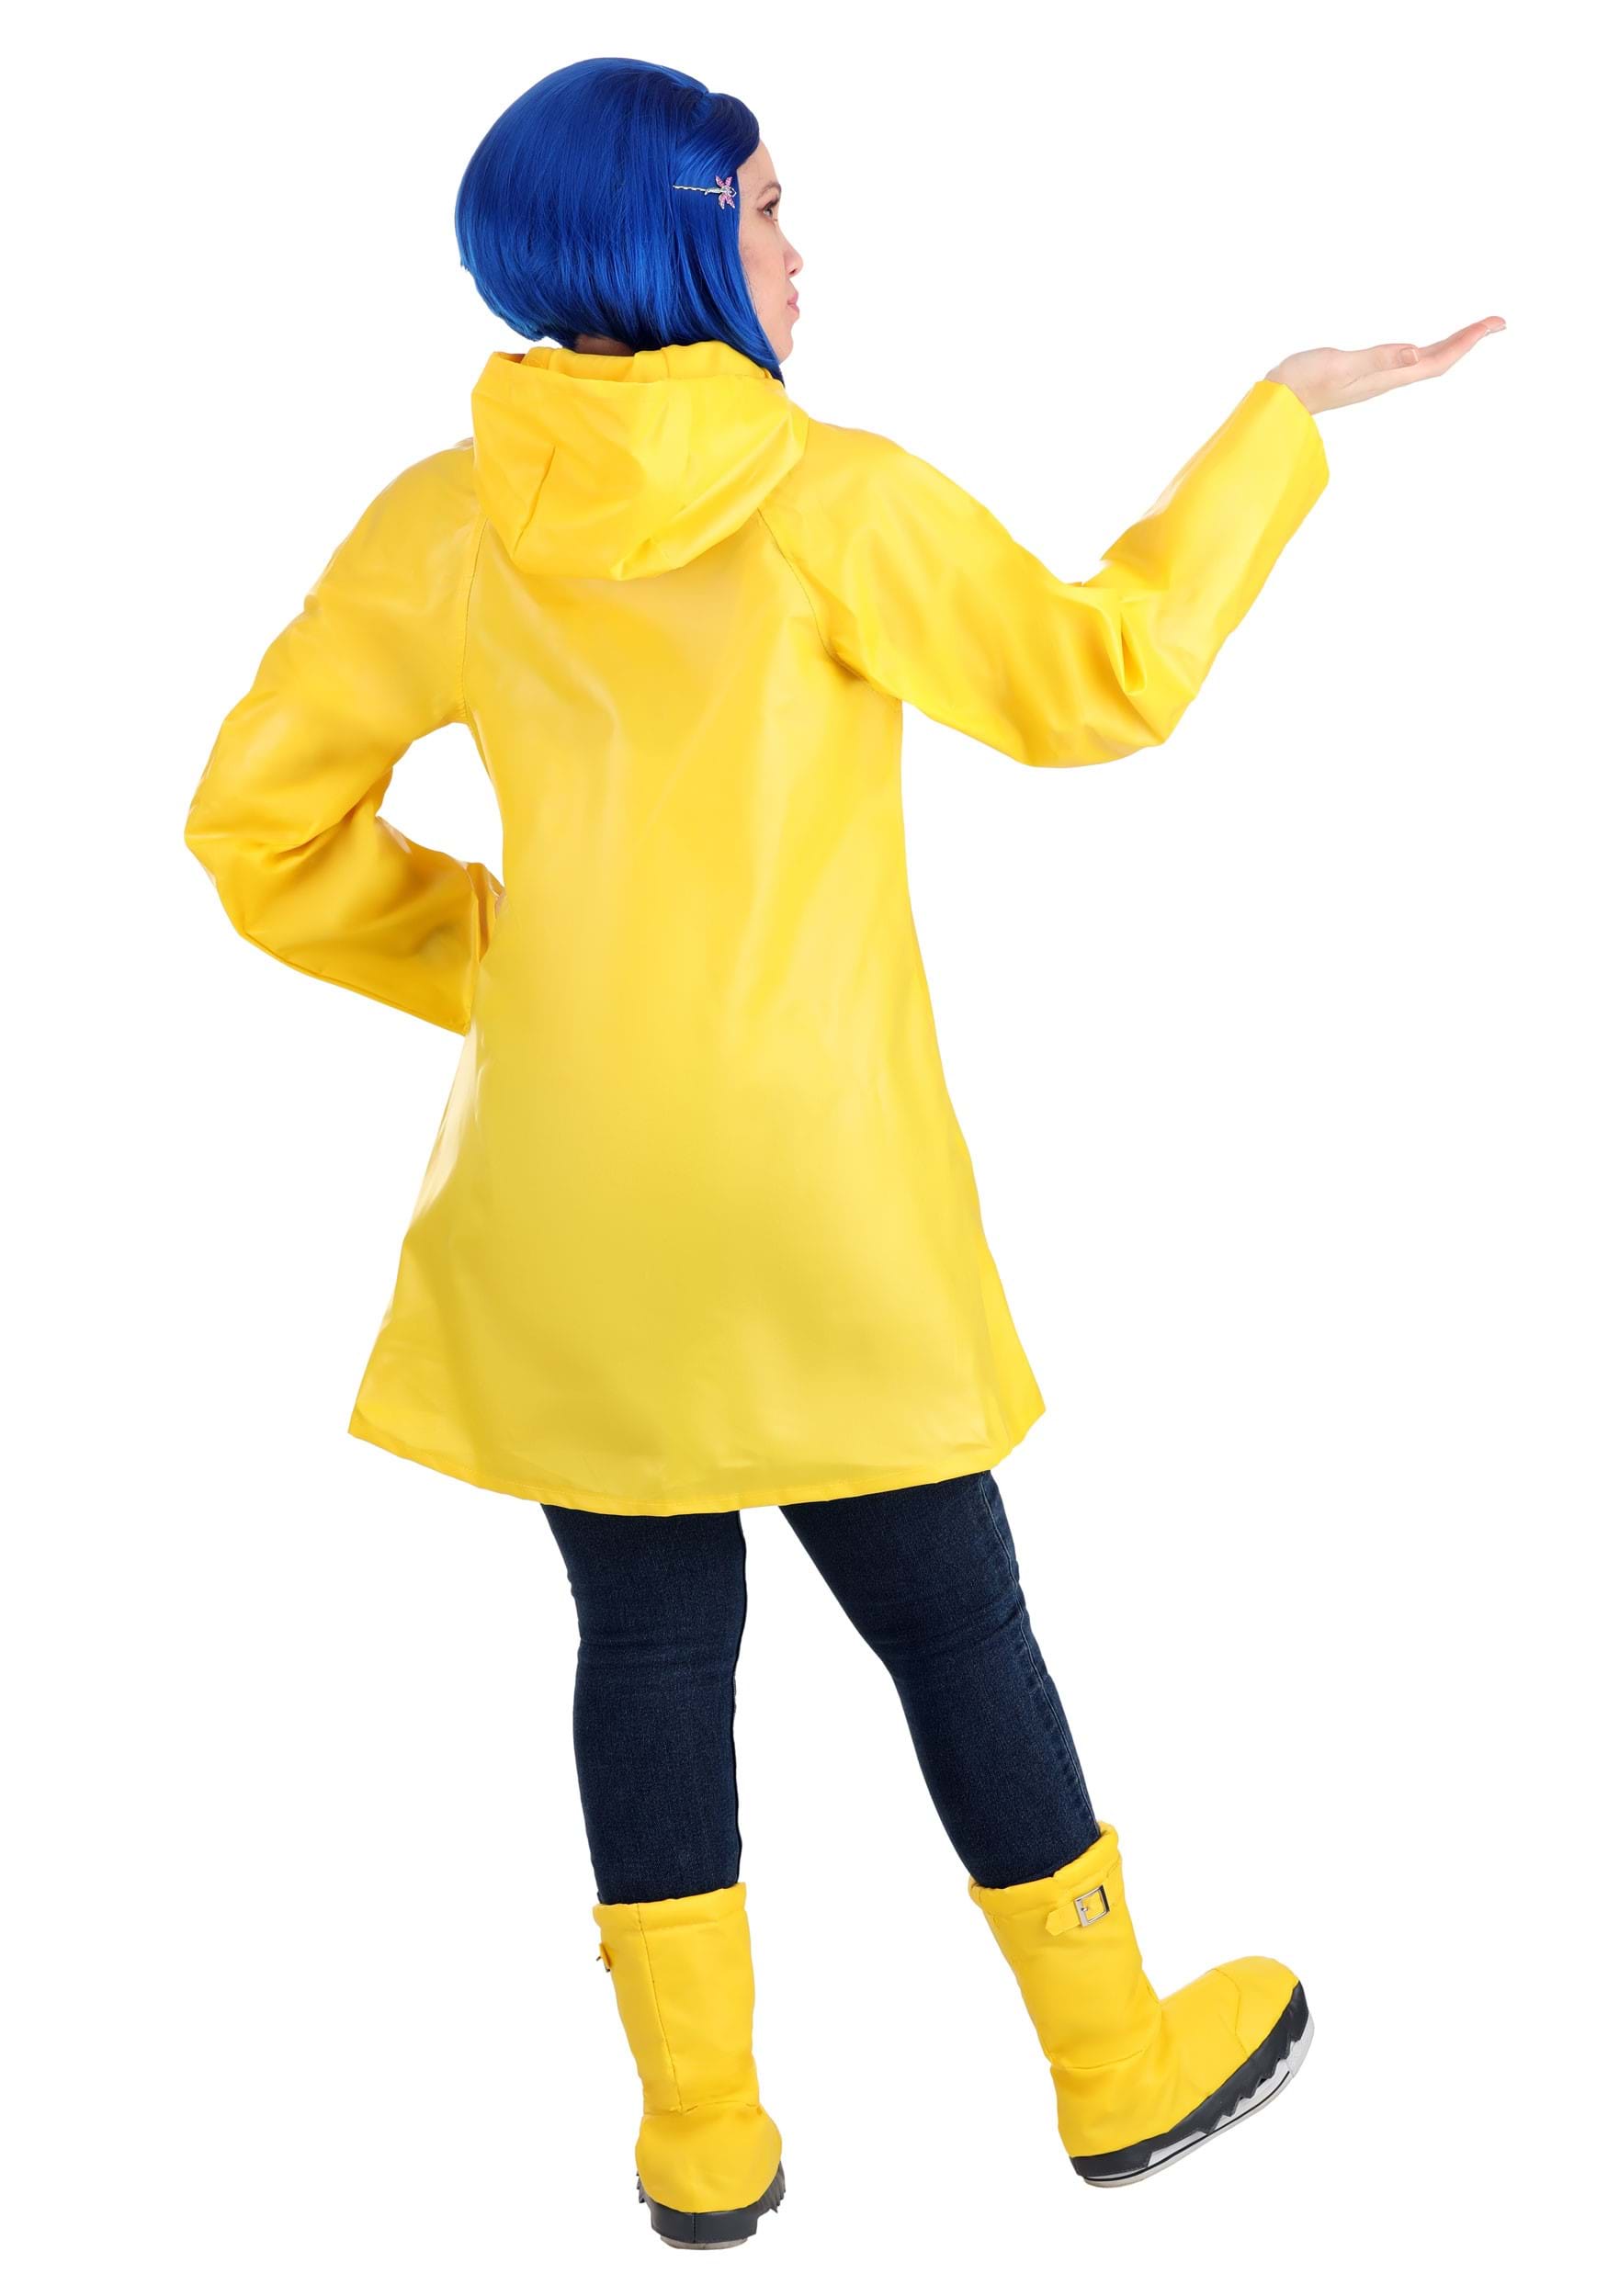 Coraline Costume From Laika